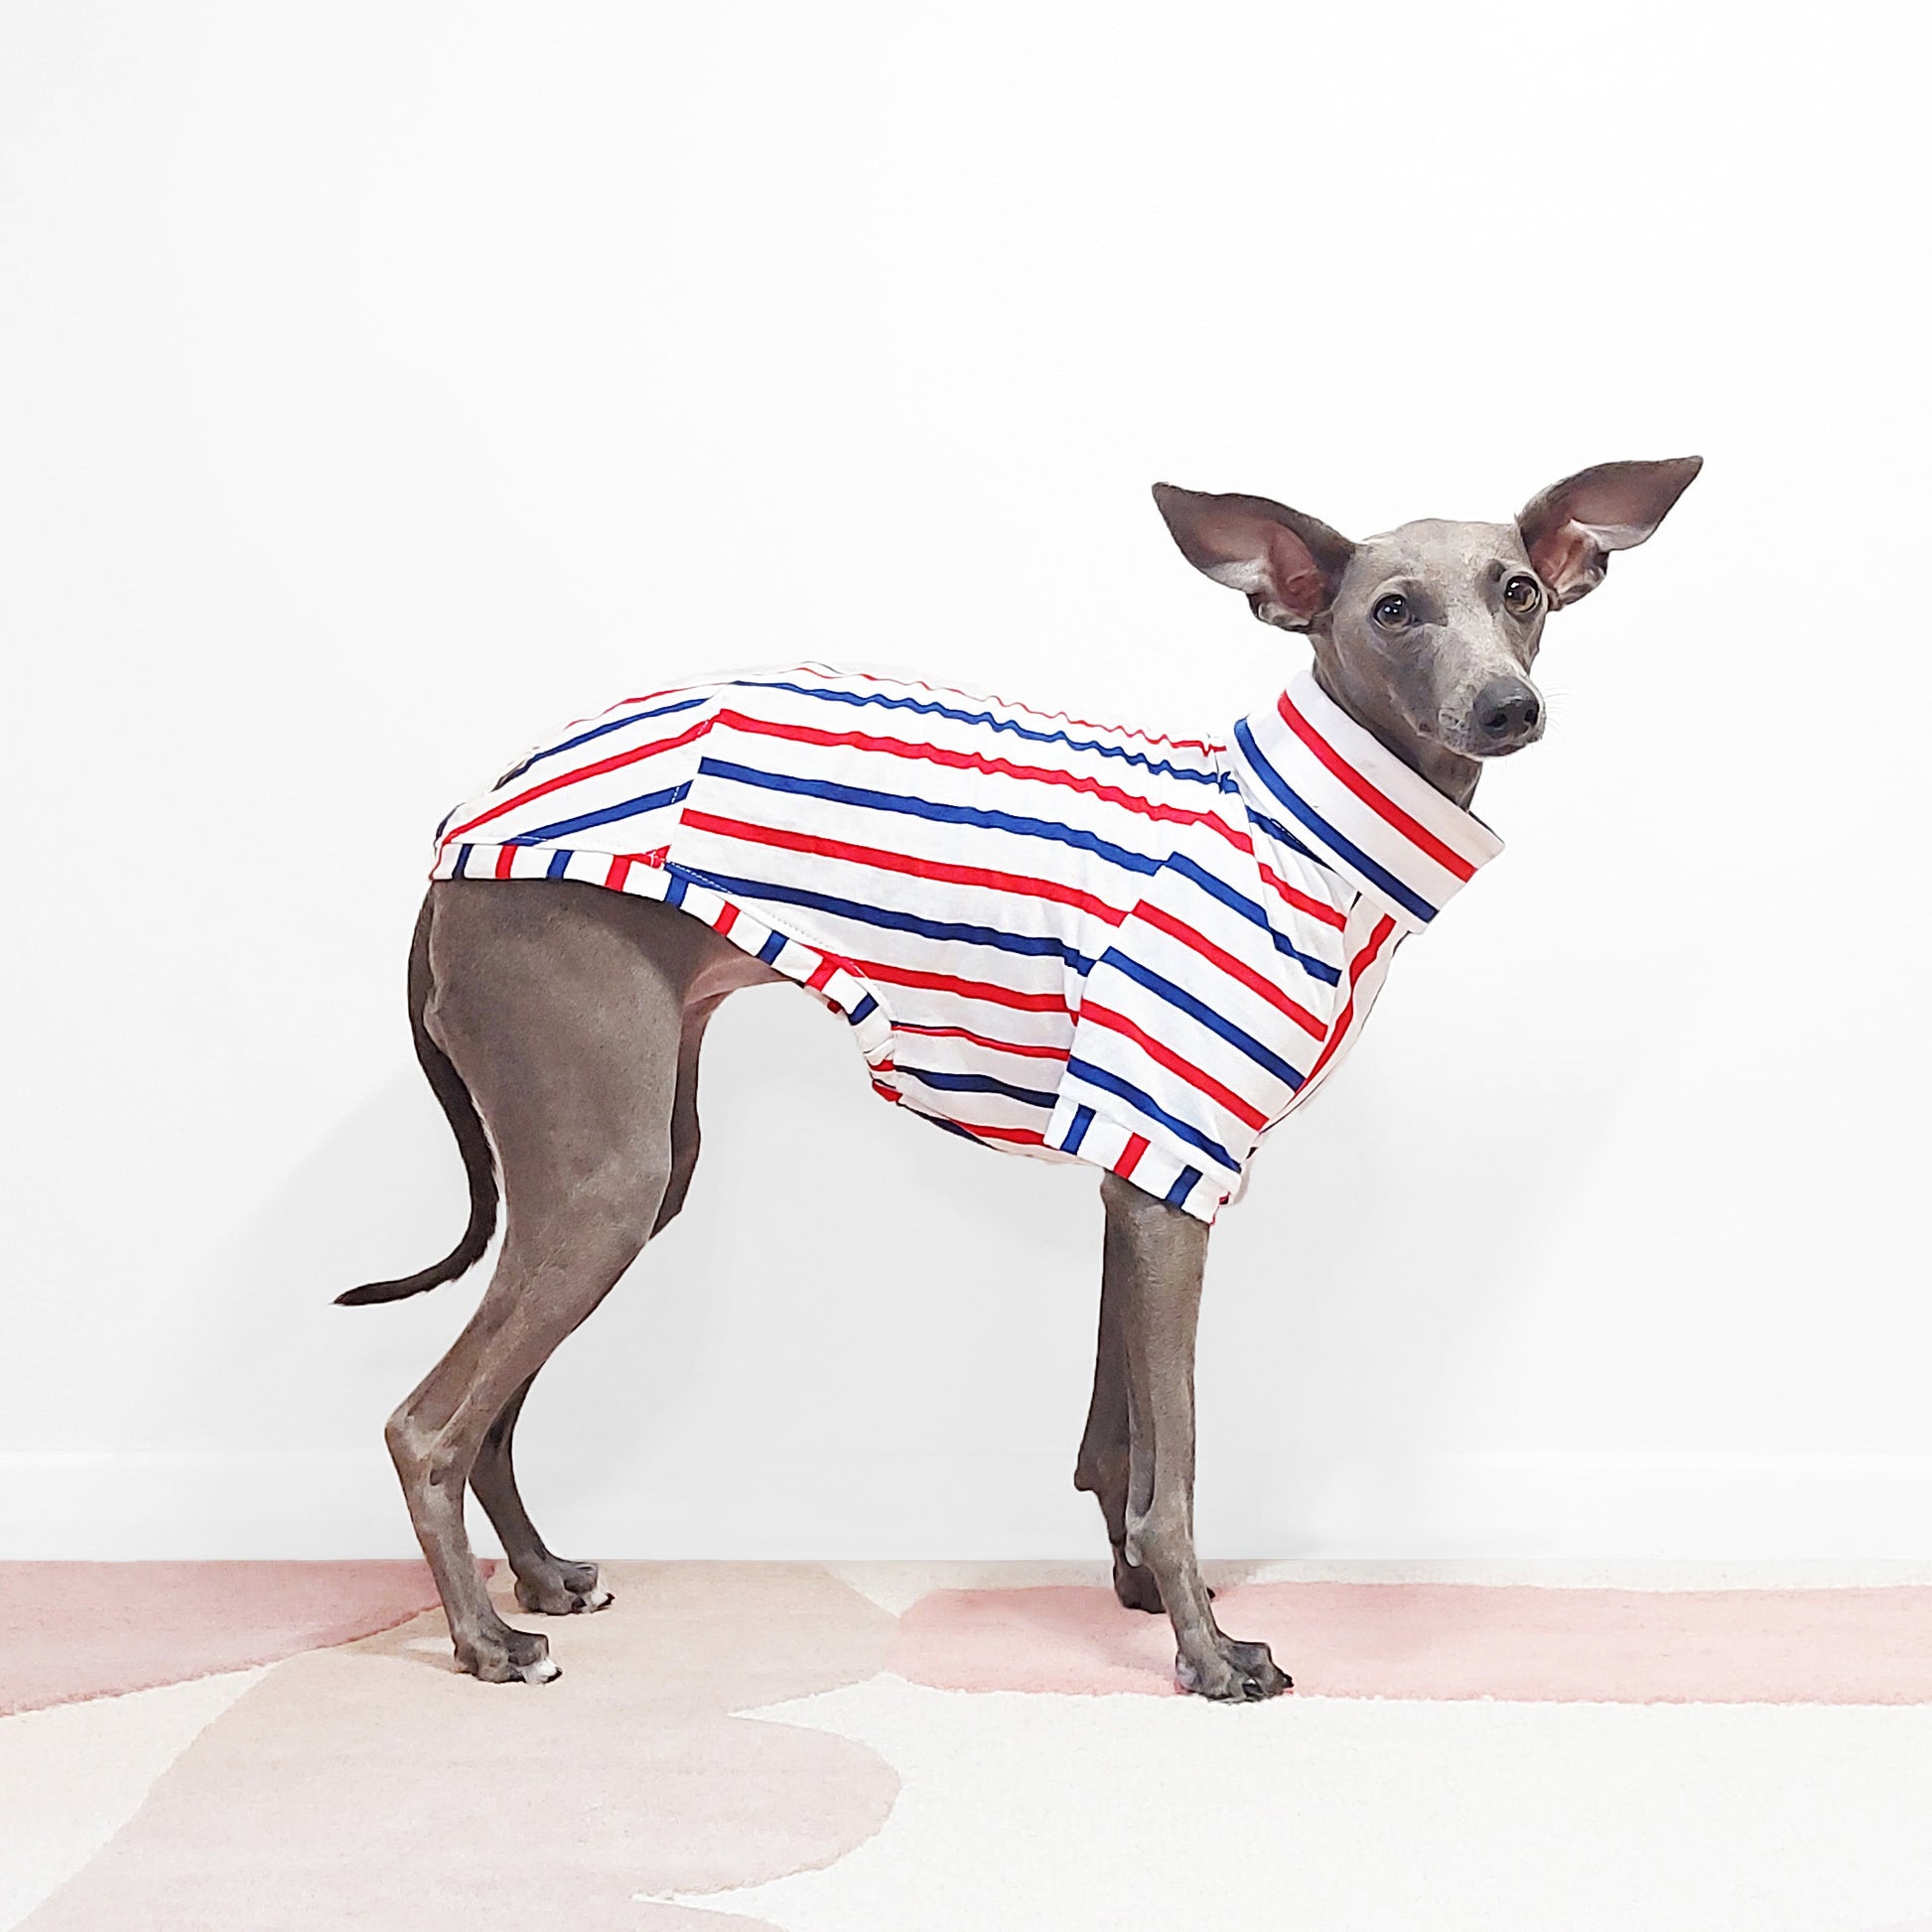 Italian greyhound and whippet t-shirt for dogs made from sustainable 100% organic cotton by Le Pup